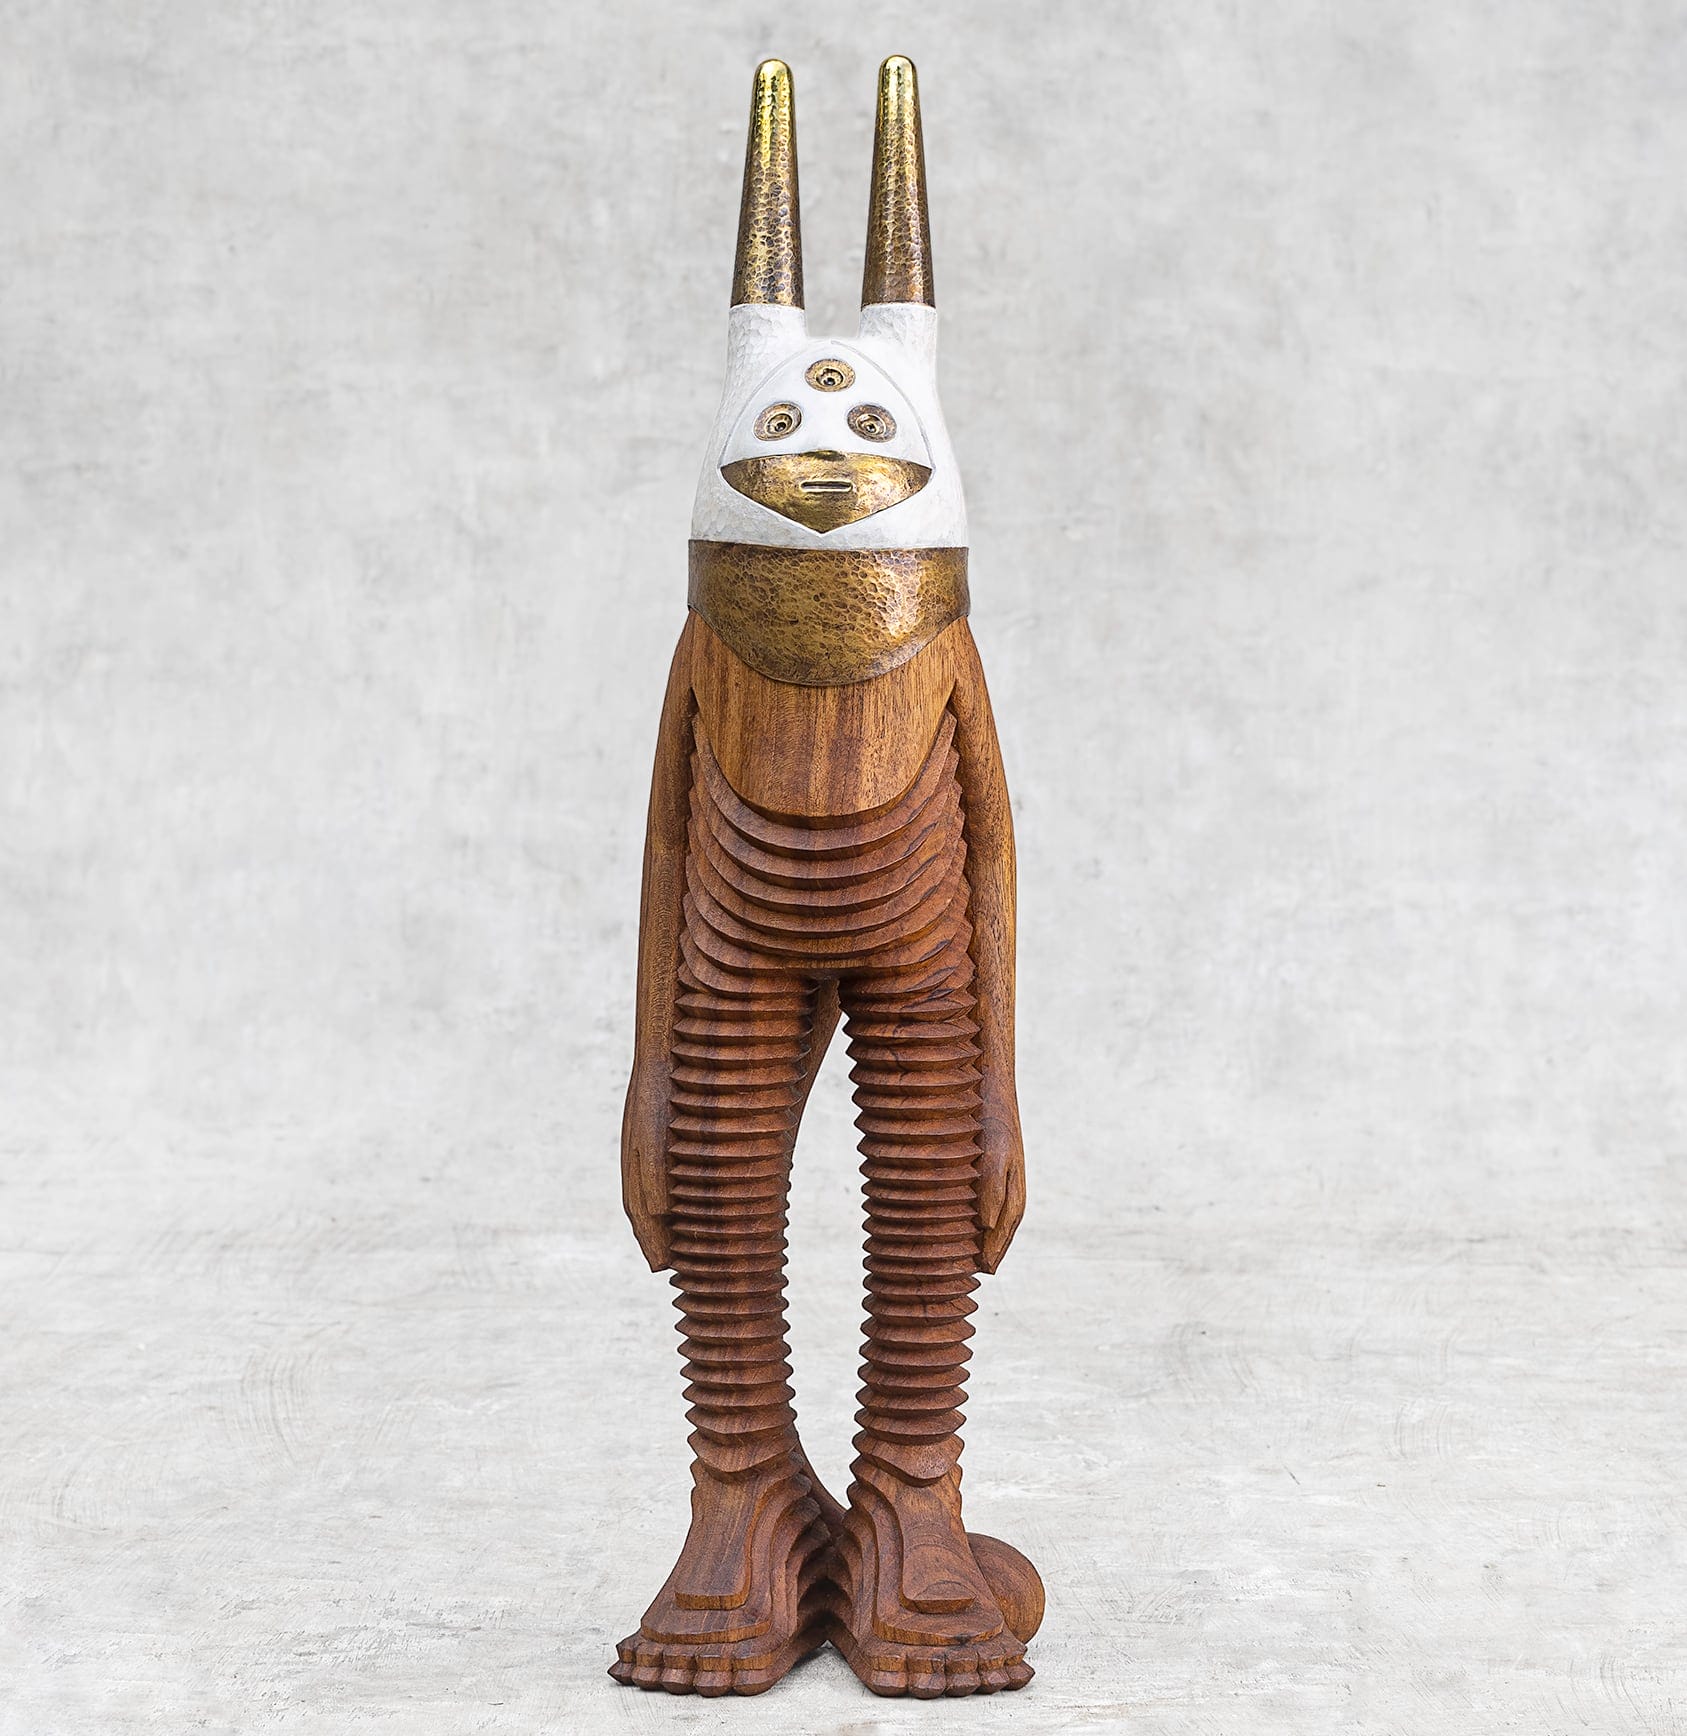 a wooden character with textured legs and a white and gold mask covering its face with three eyes